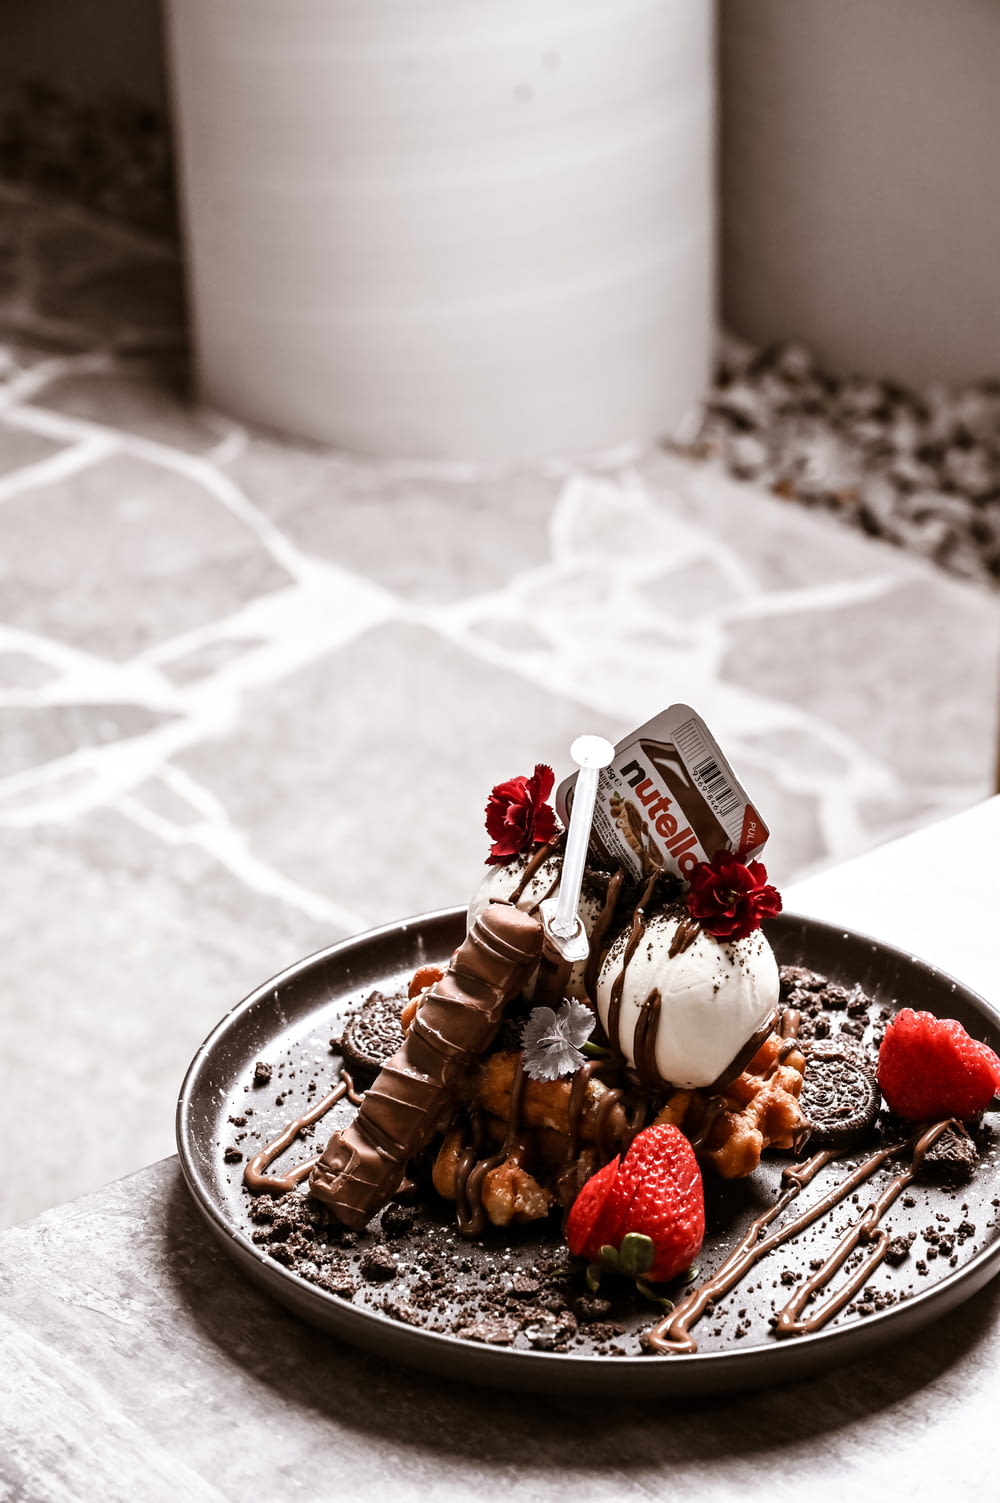 a plate of food with chocolate, strawberries, and ice cream